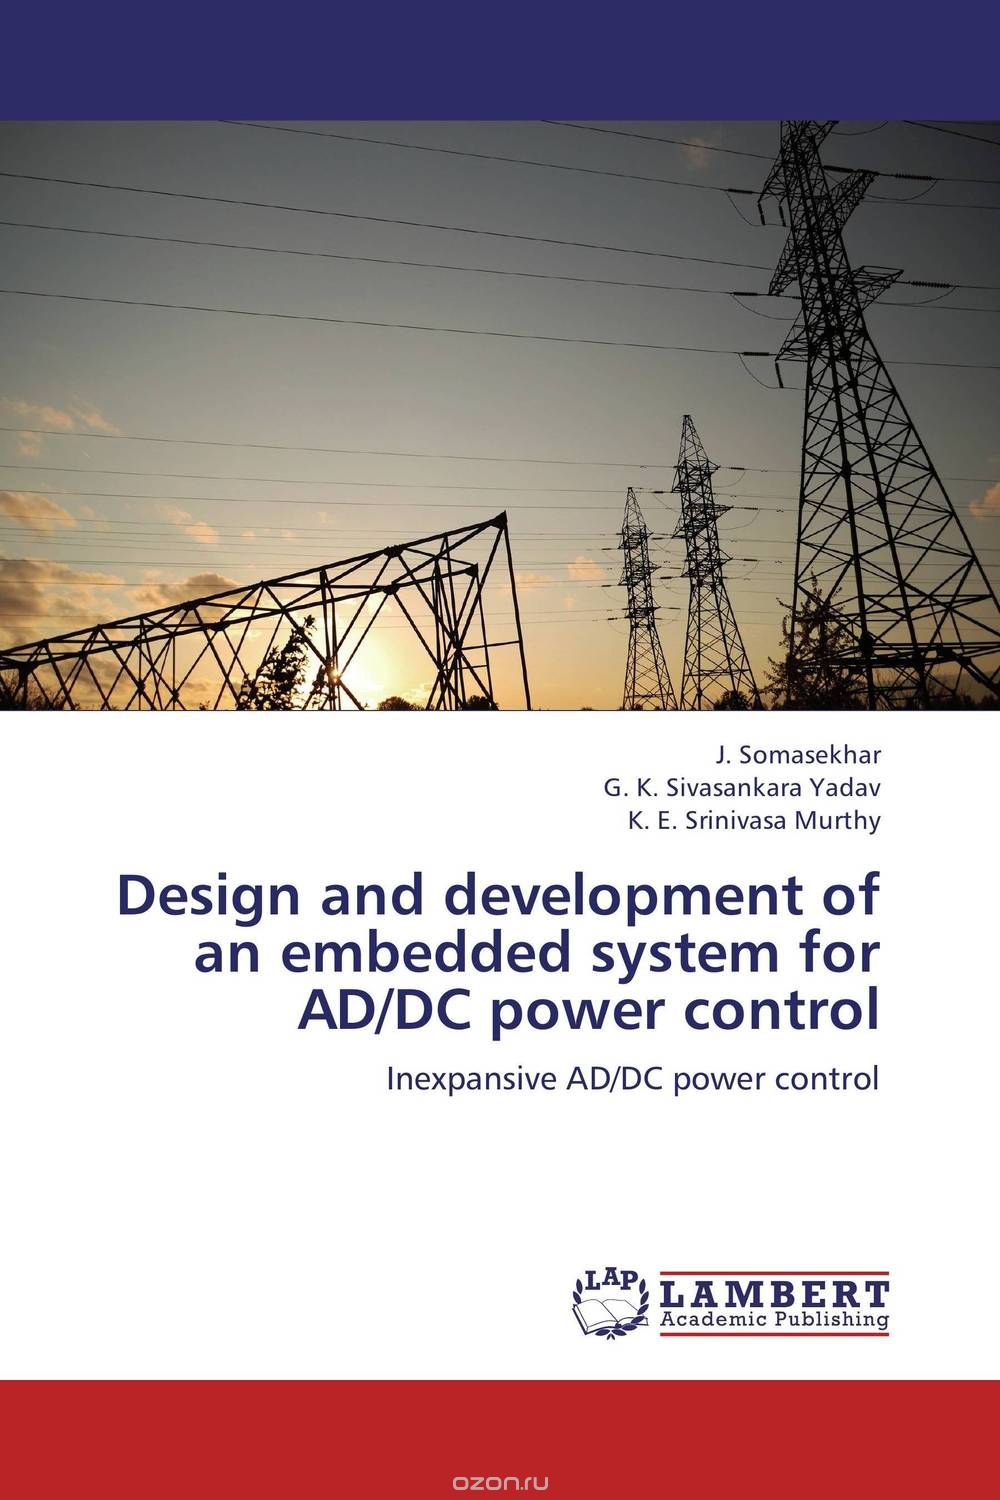 Design and development of an embedded system for AD/DC power control